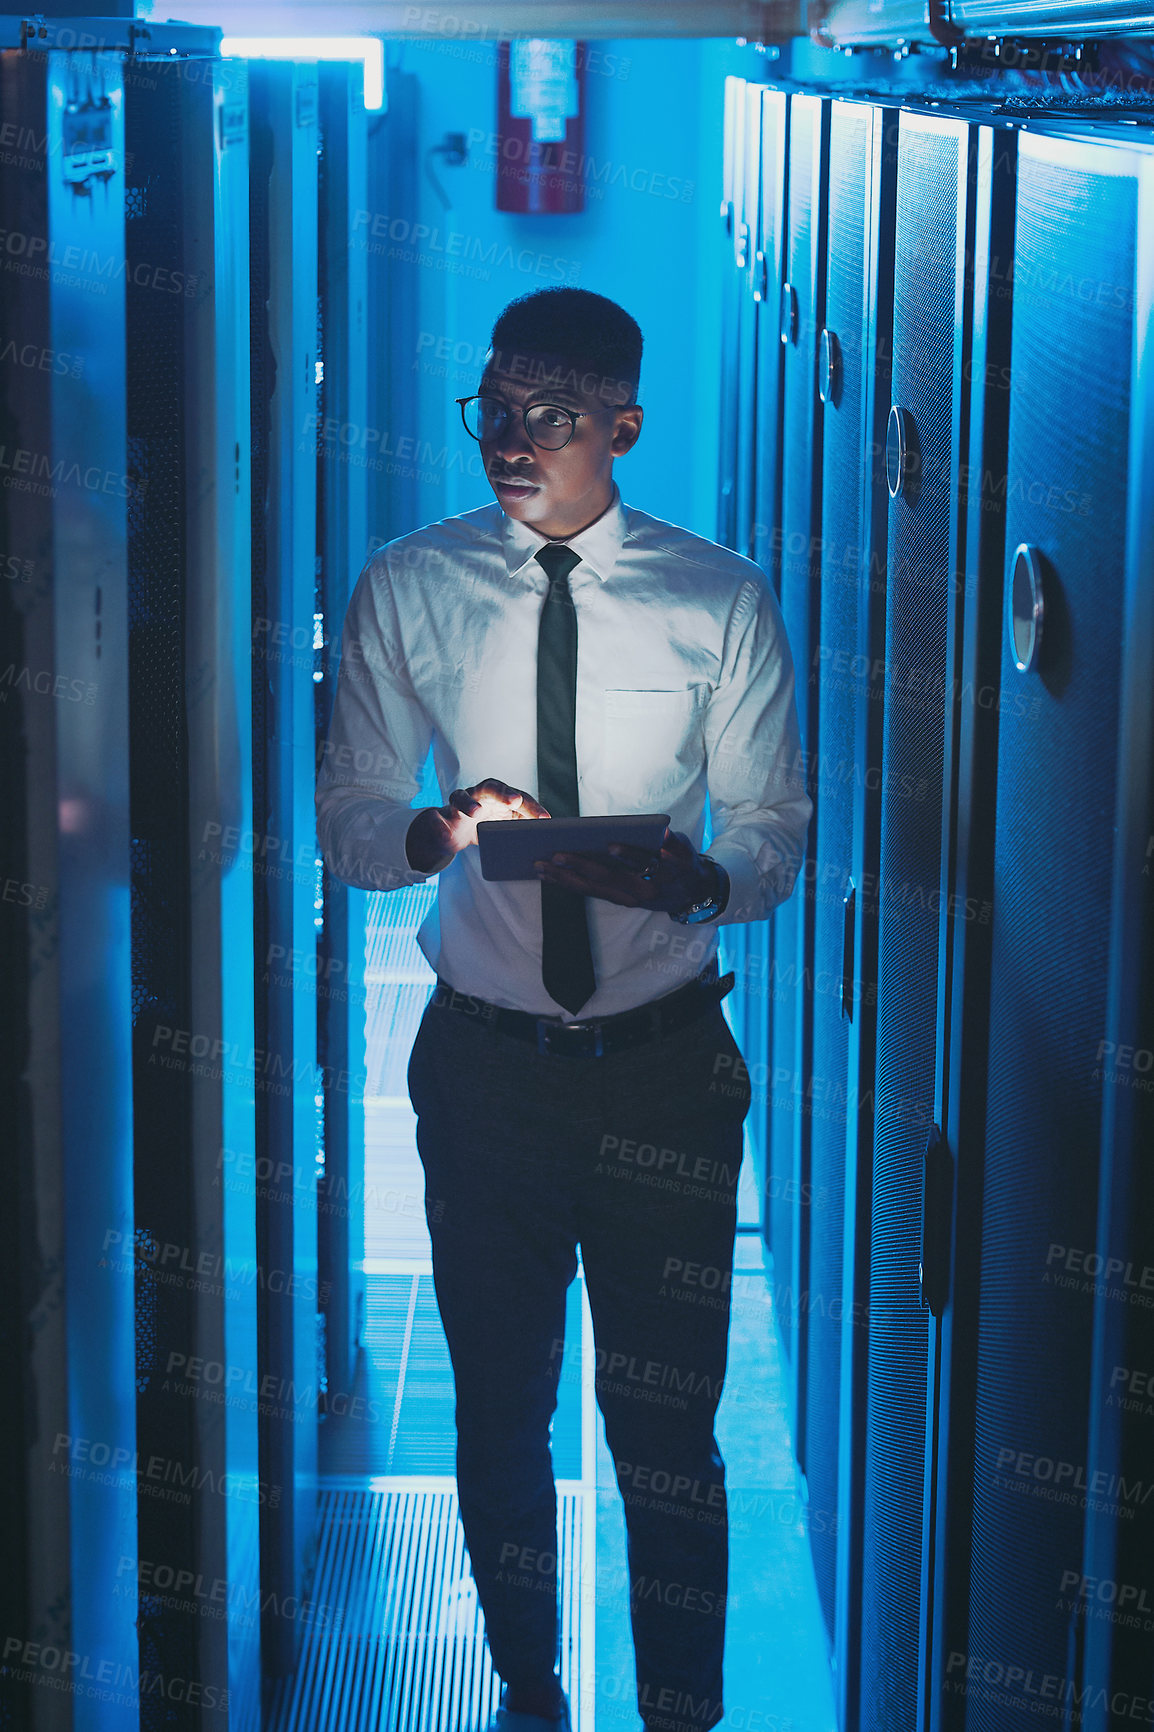 Buy stock photo Shot of a young IT specialist standing alone in the server room and using a digital tablet